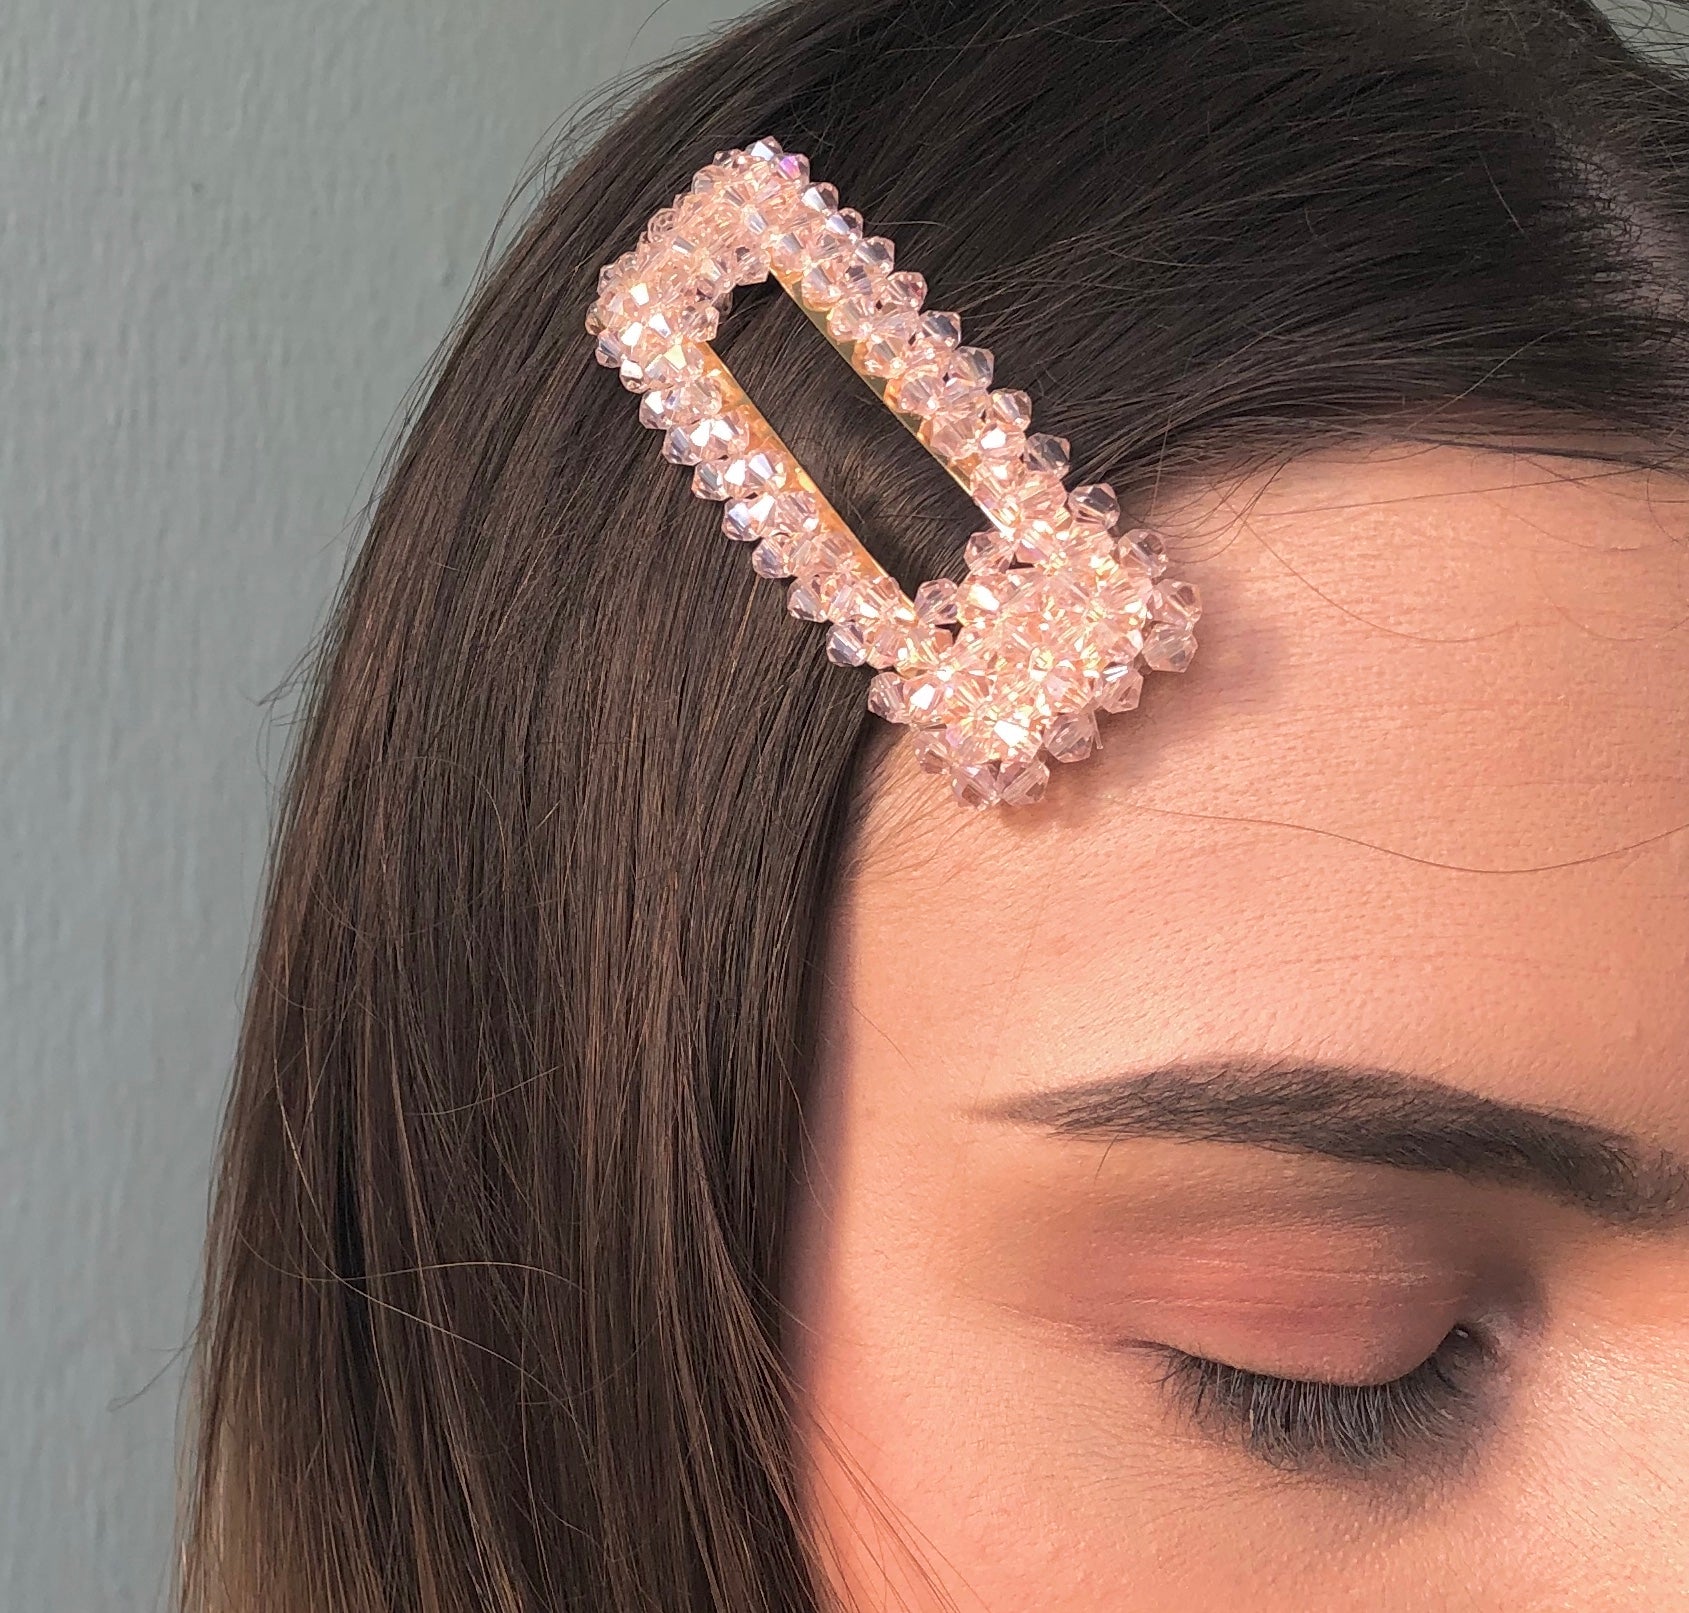 Candy Gems Hair Accessories Collection by Veronique